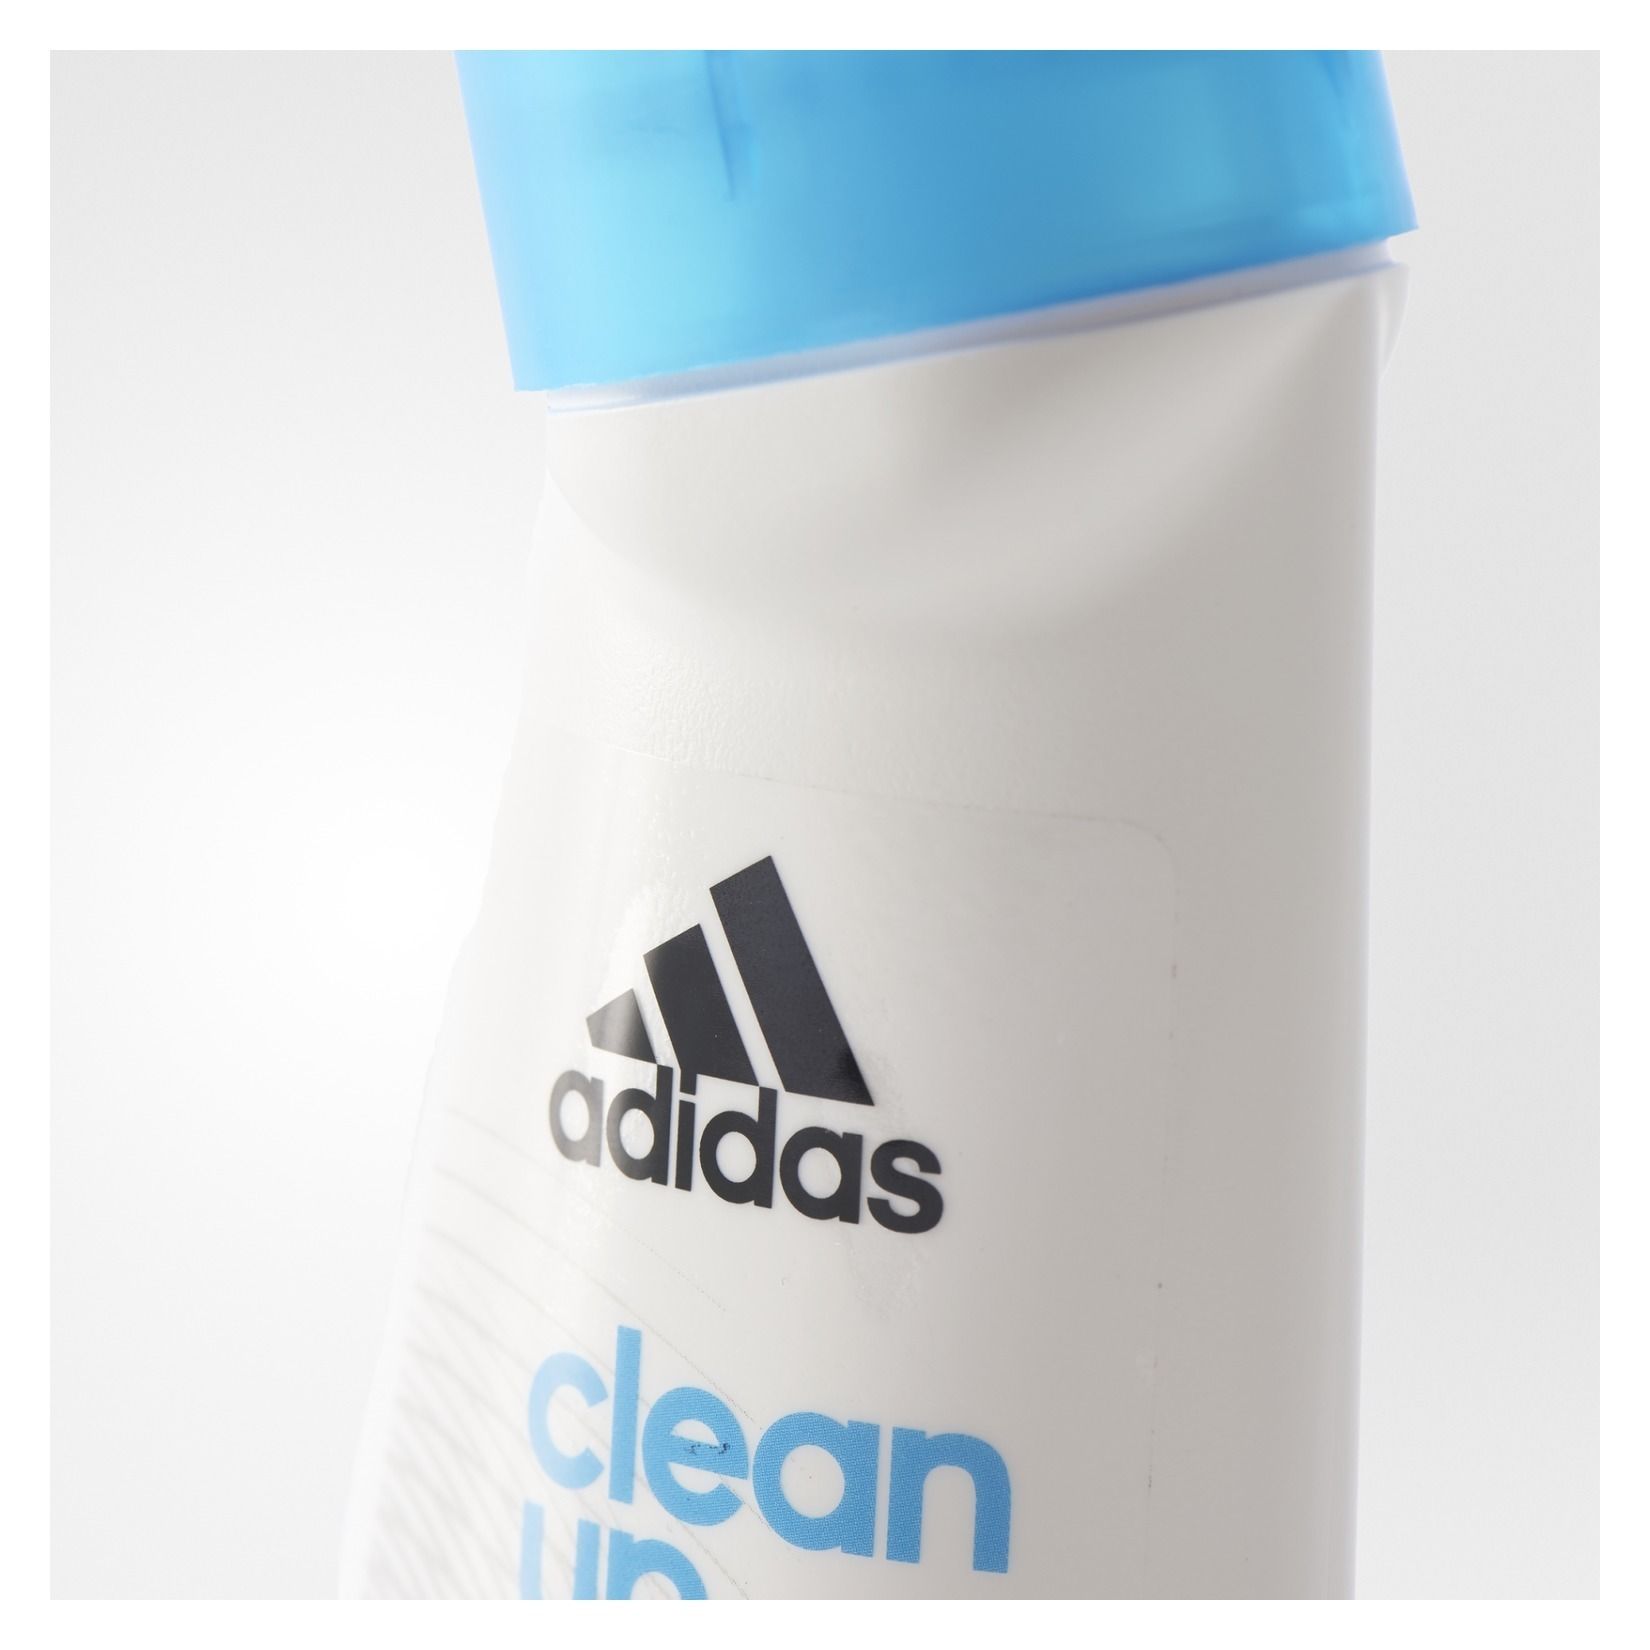 adidas Shoe Care- Clean-Up (Individual)